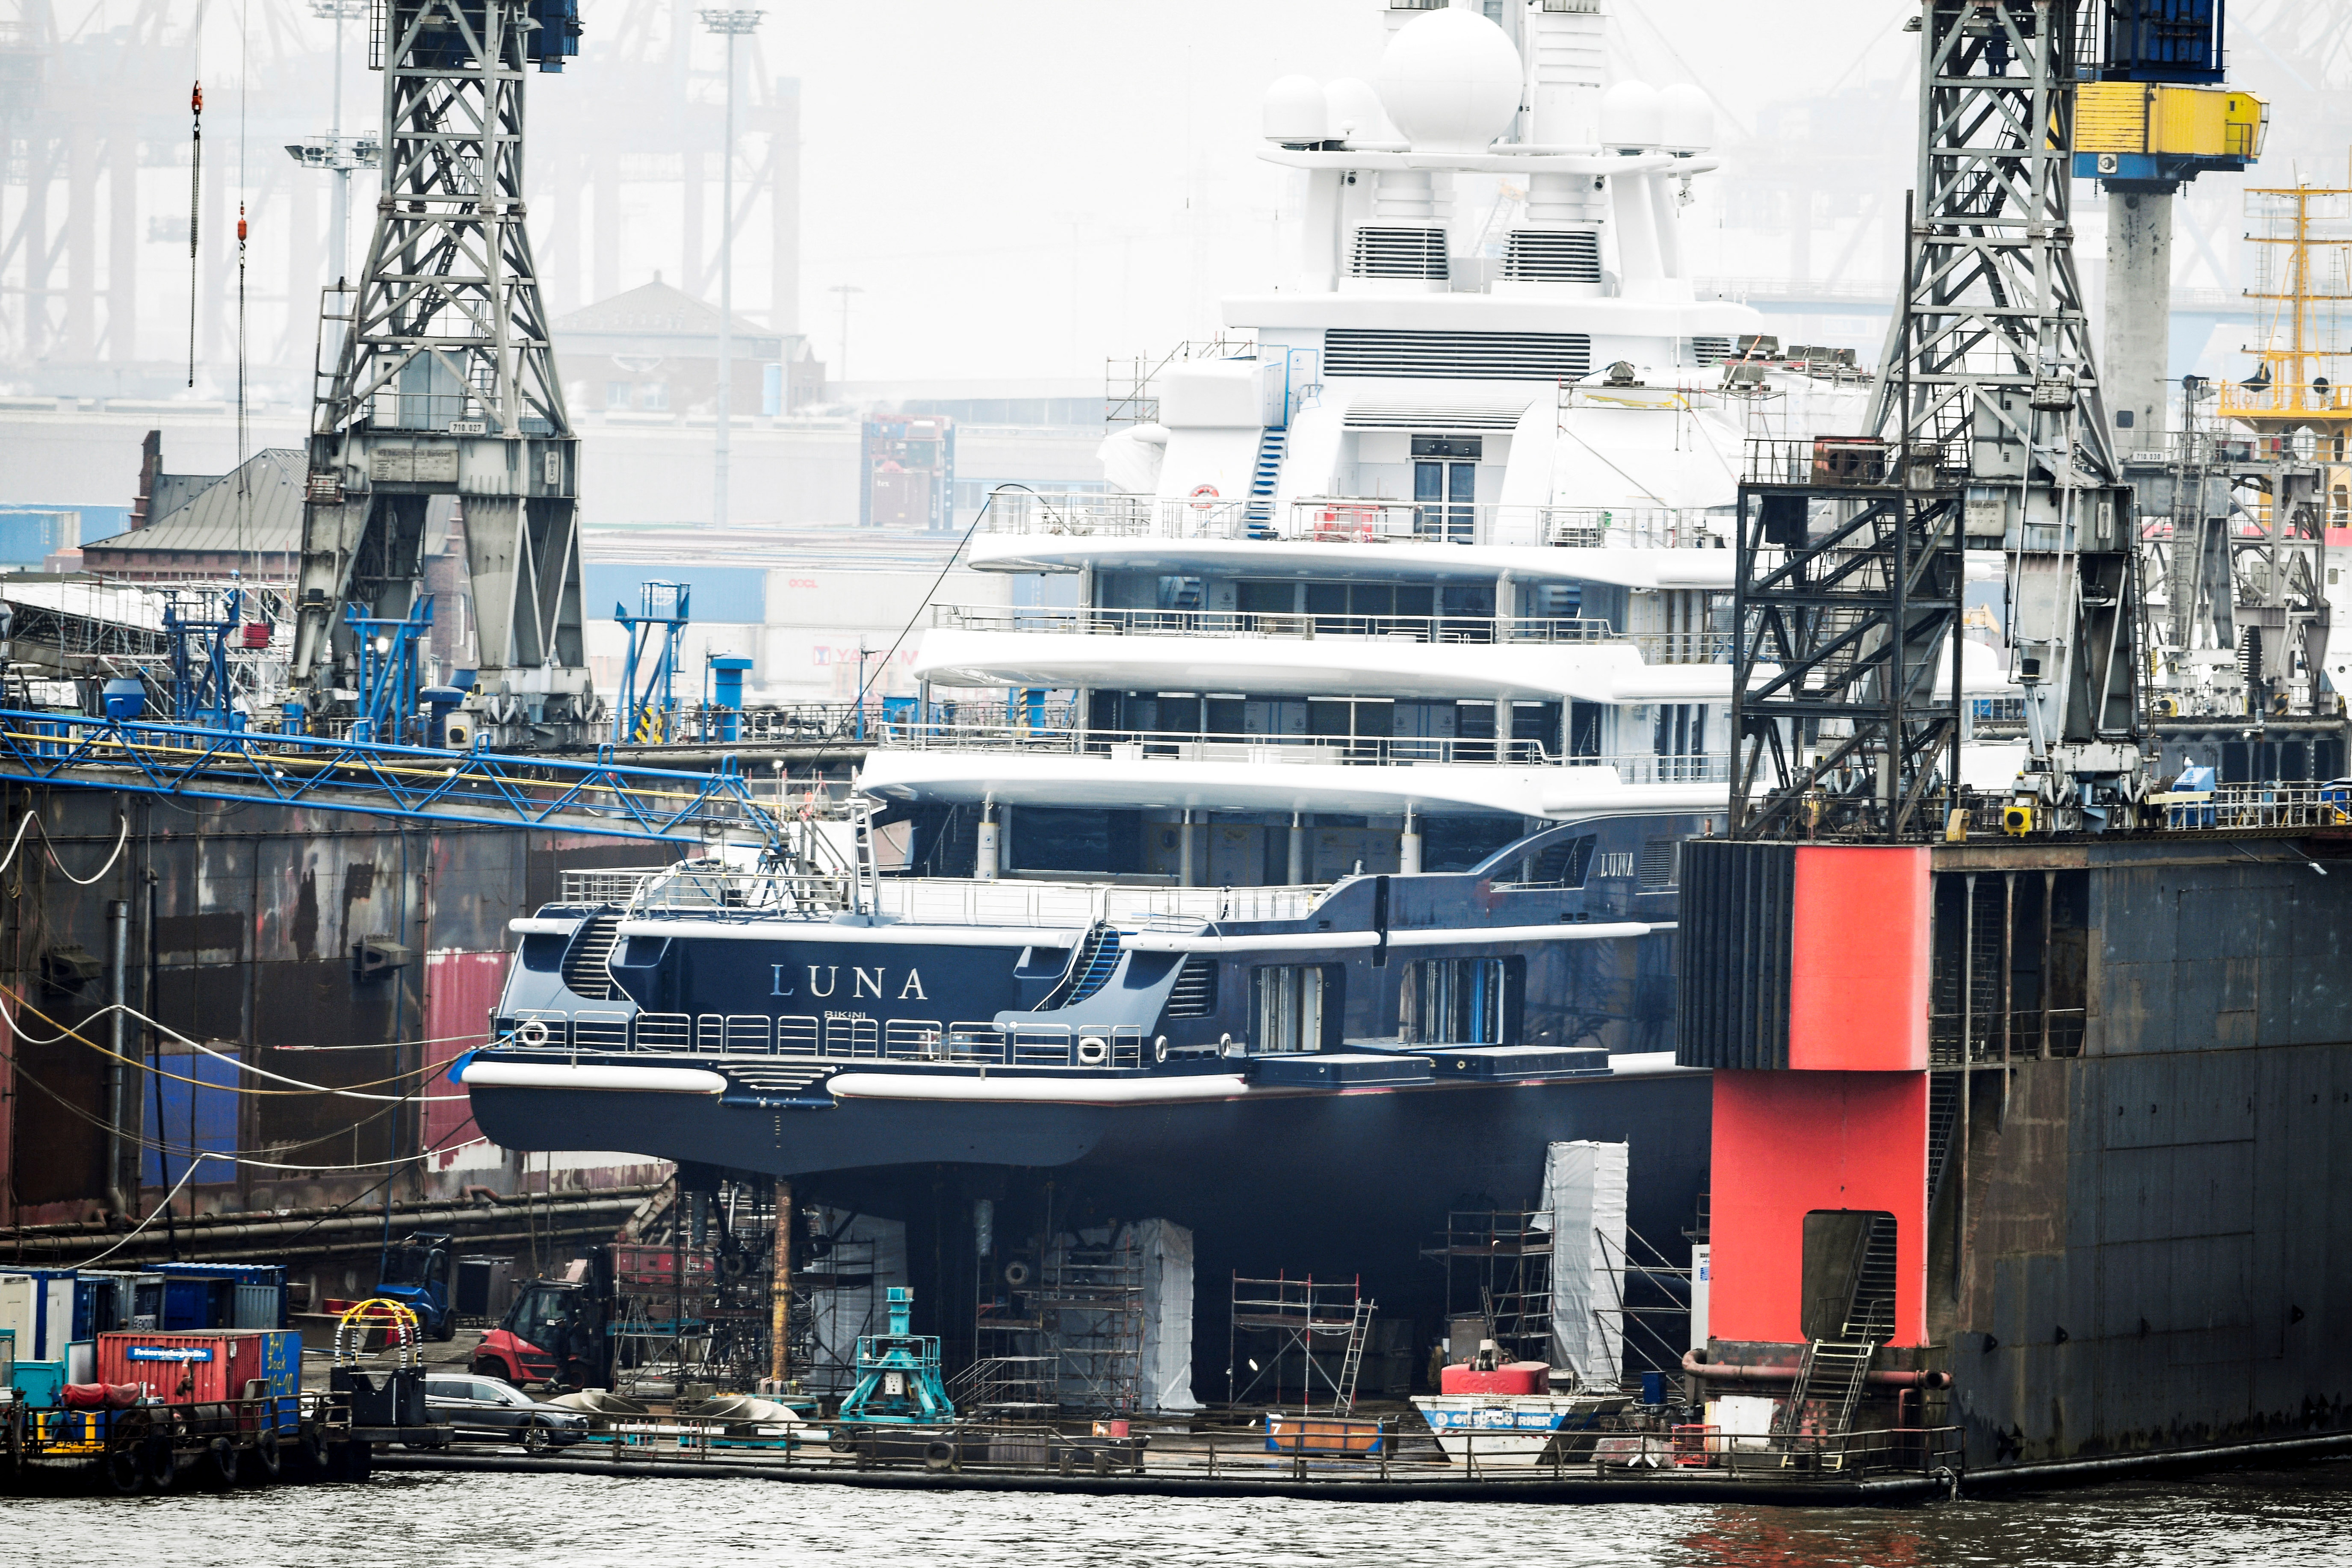 The 115 metre superyacht Luna lies in the Blohm & Voss dock in the harbour, in Hamburg